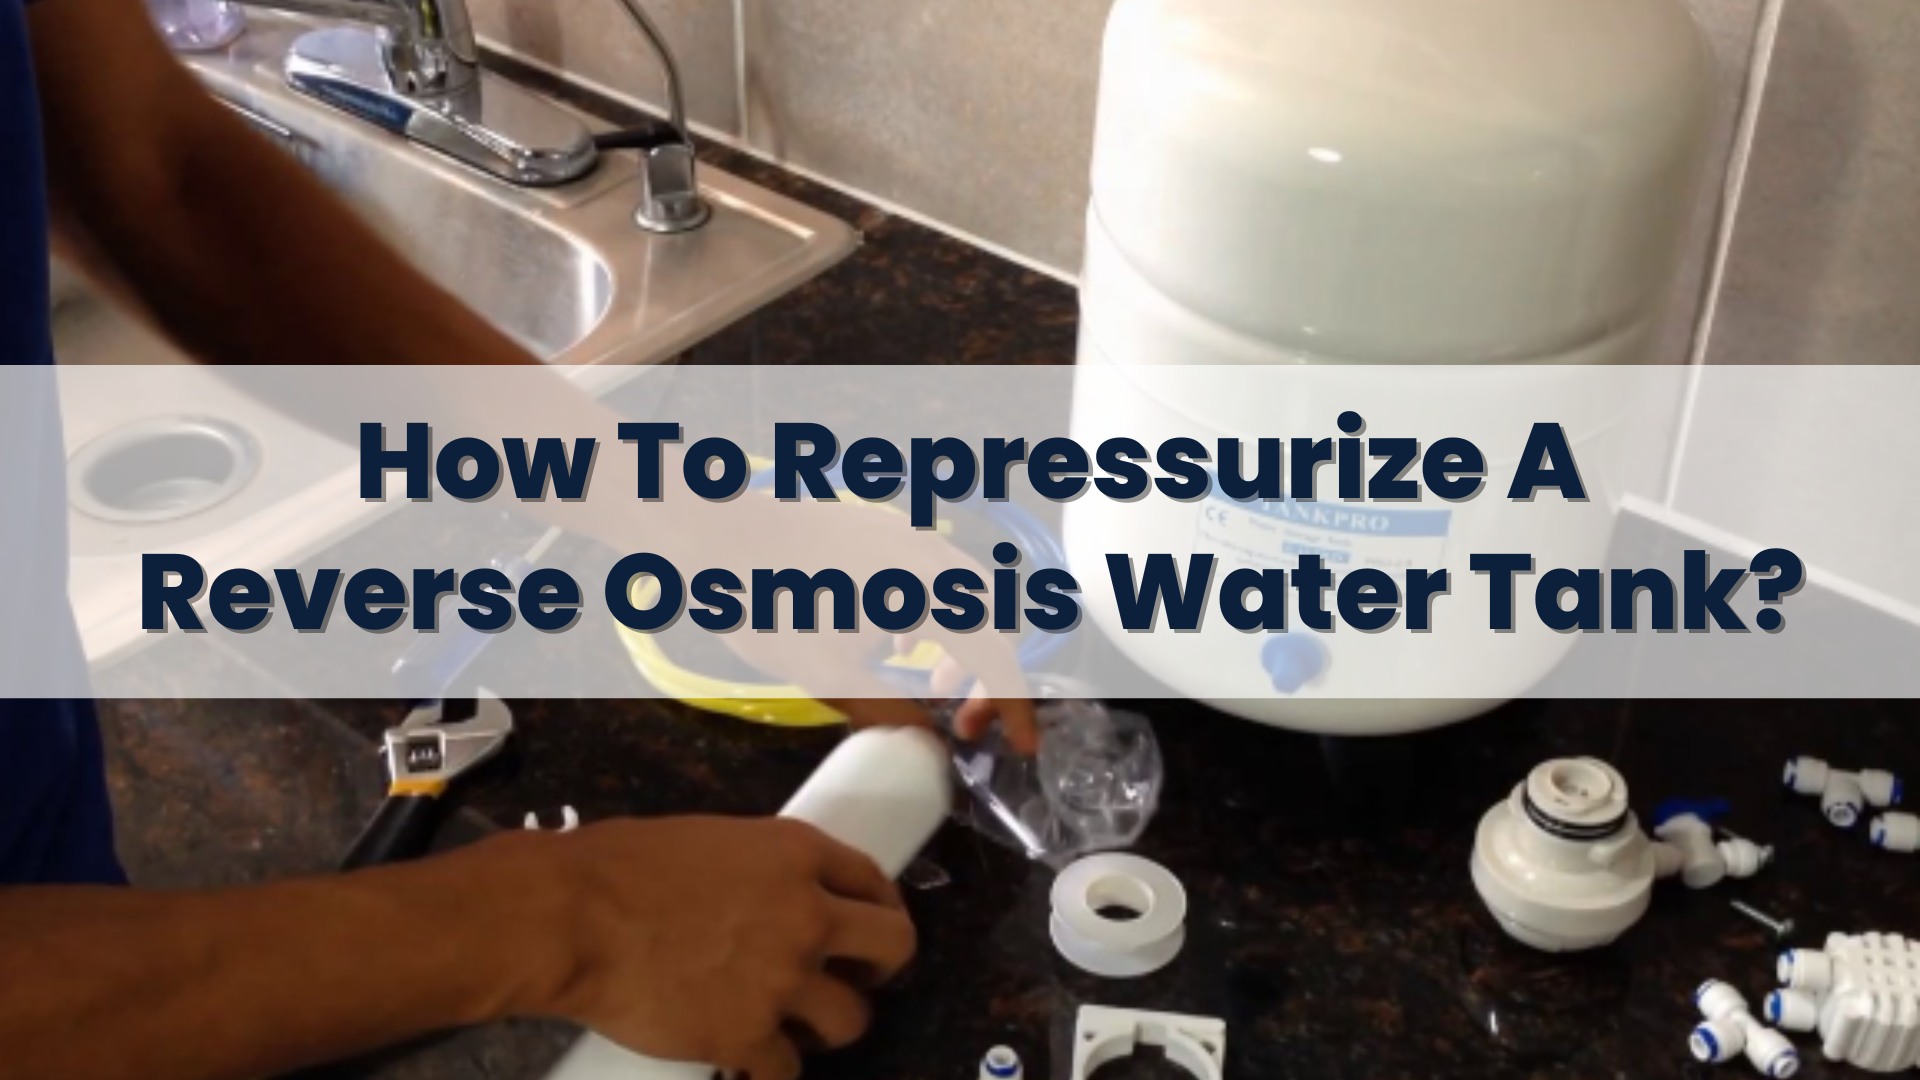 How To Repressurize A Reverse Osmosis Water Tank